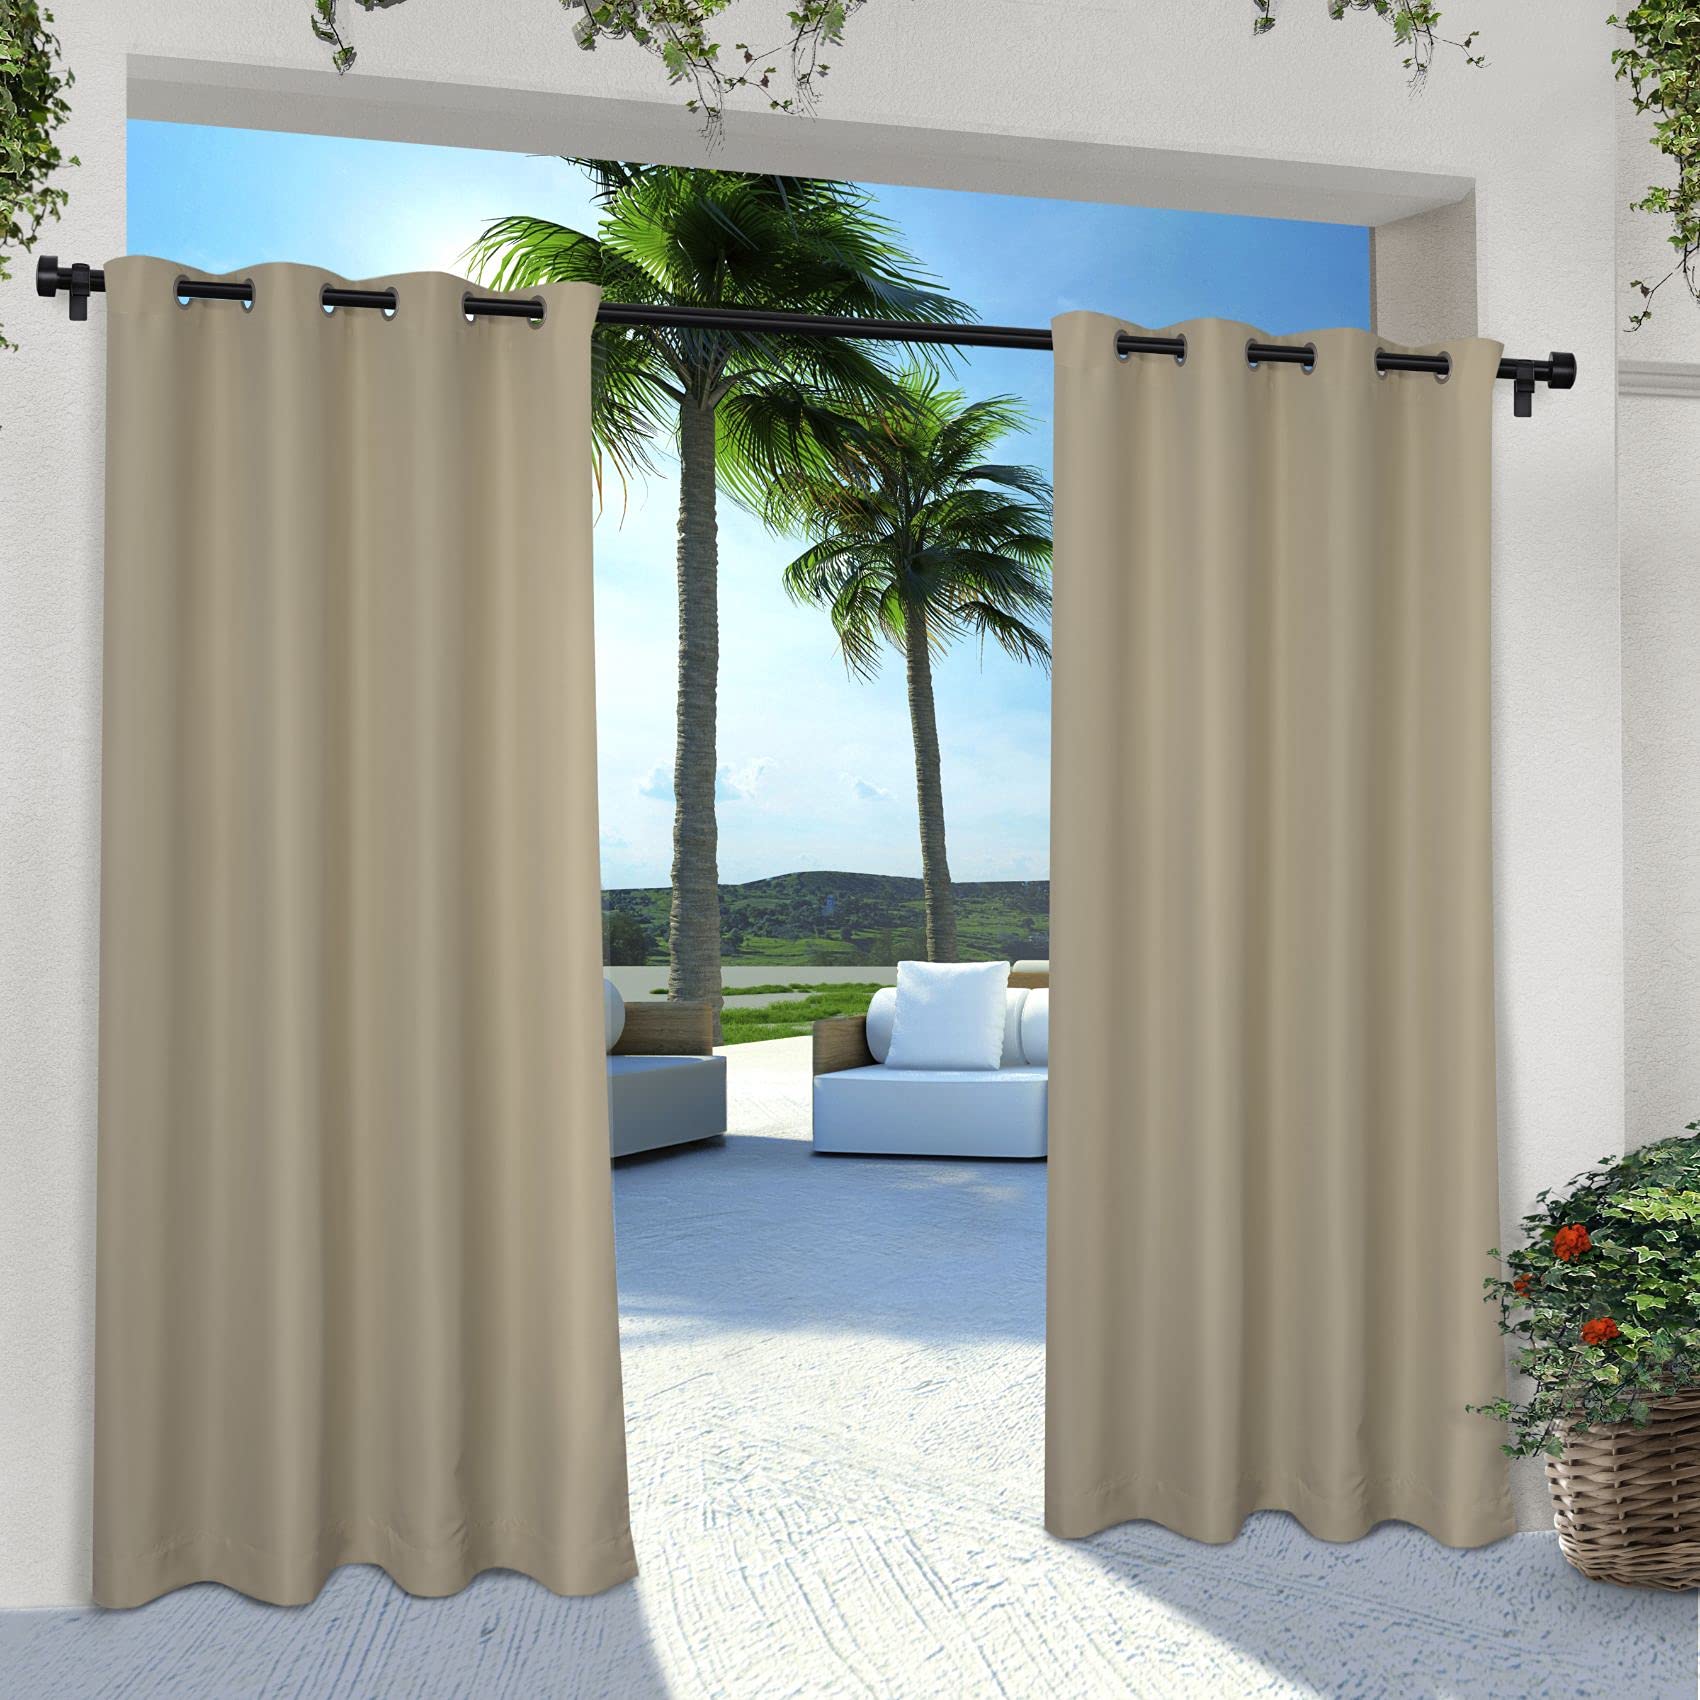 2-Piece 54" x 108" Exclusive Home Indoor/Outdoor Light Filtering Grommet Top Curtain Panel (Taupe) $9.68 & More + Free Shipping